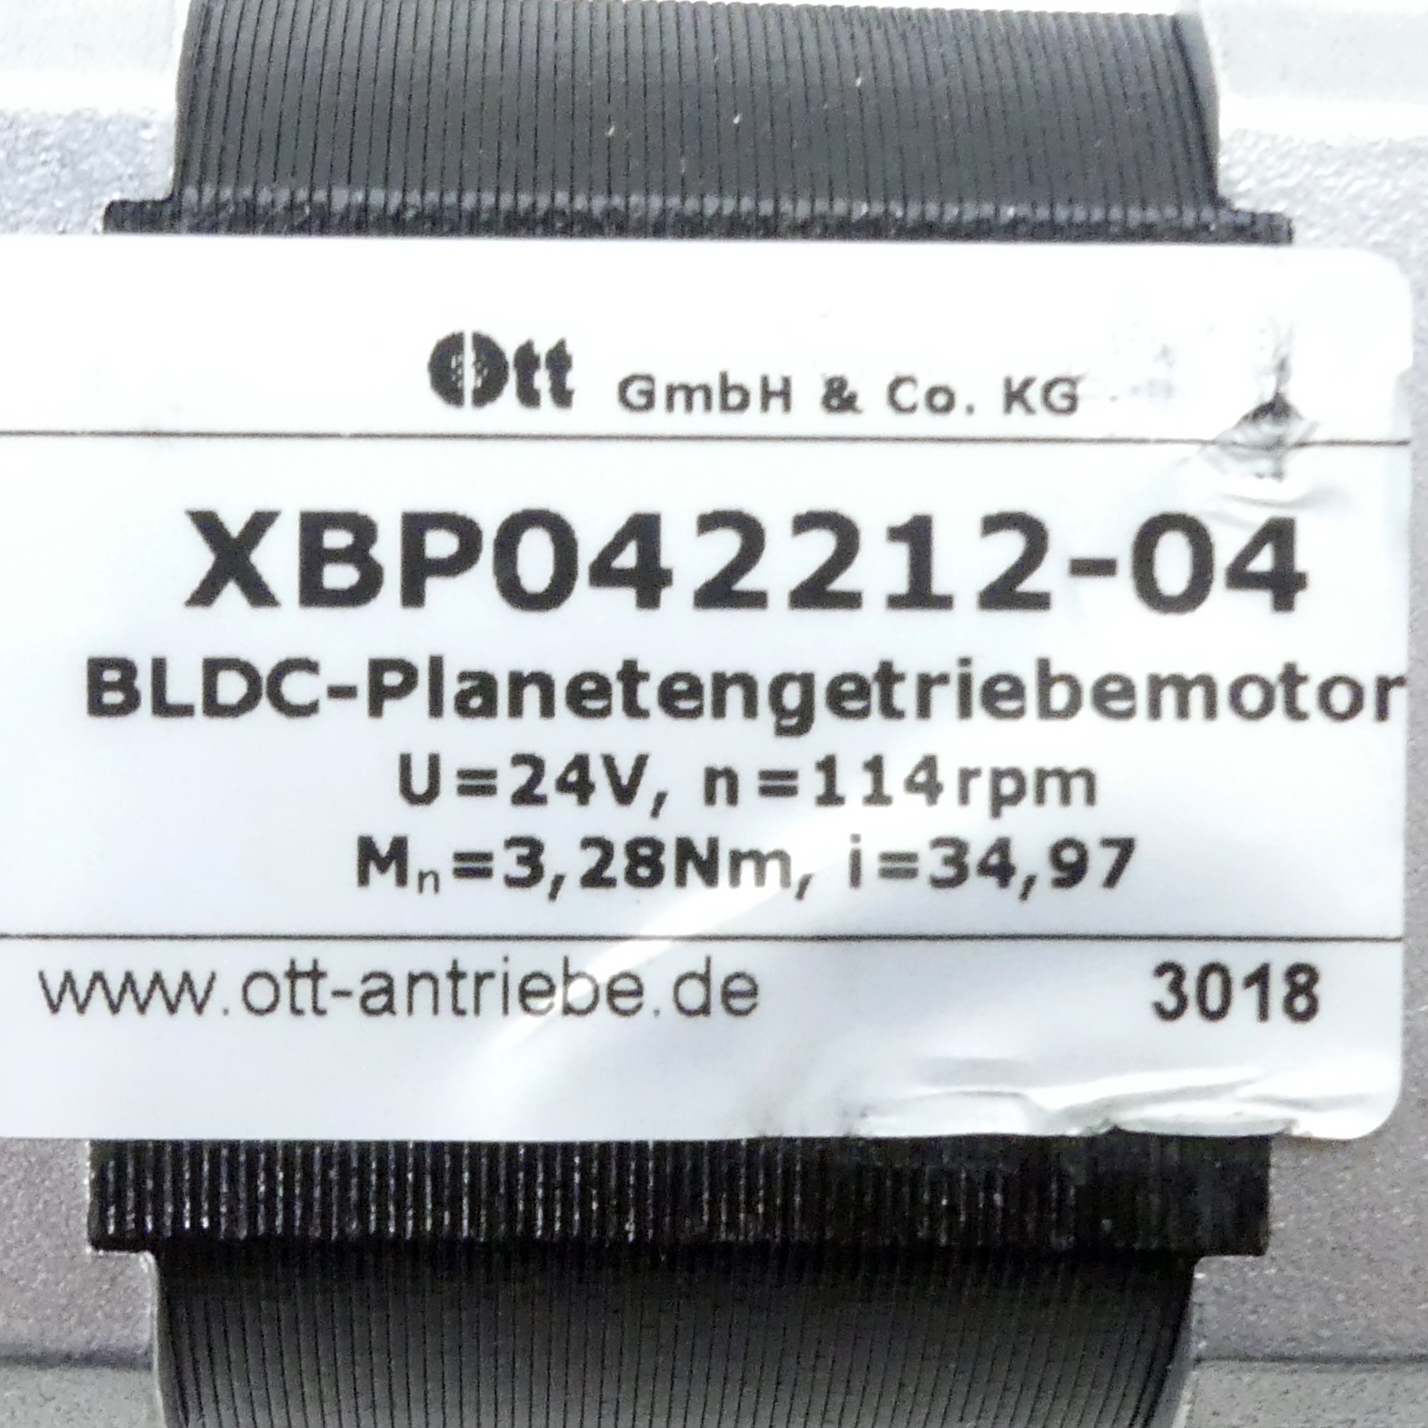 BLDC planetary geared motor 